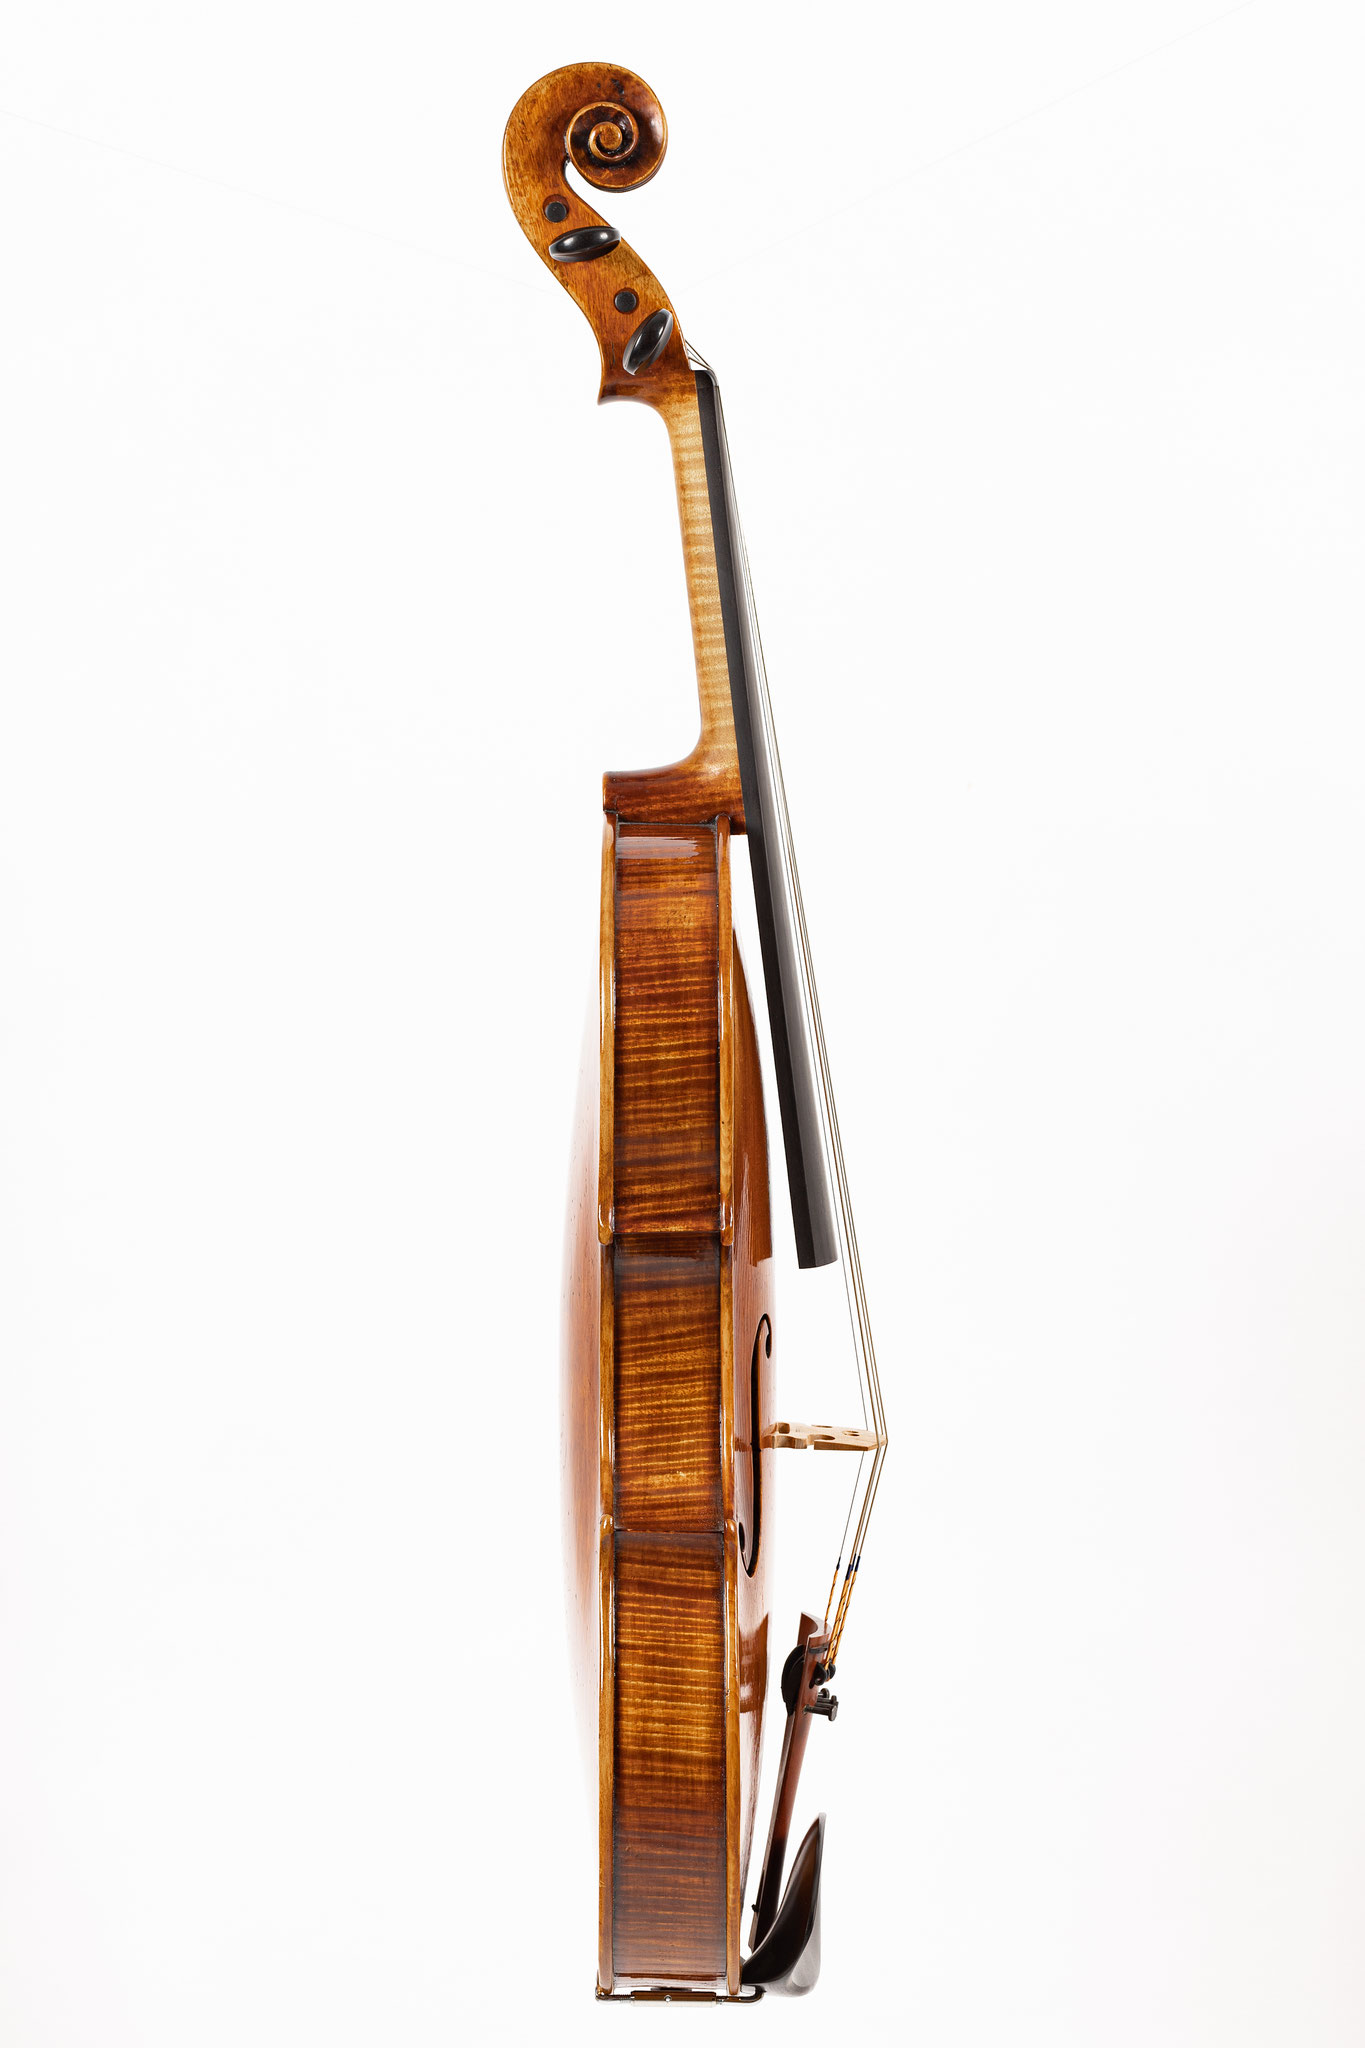 Viola in the style of G.Guarneri del Gesù (2020/CH), Photo: VDB Photography